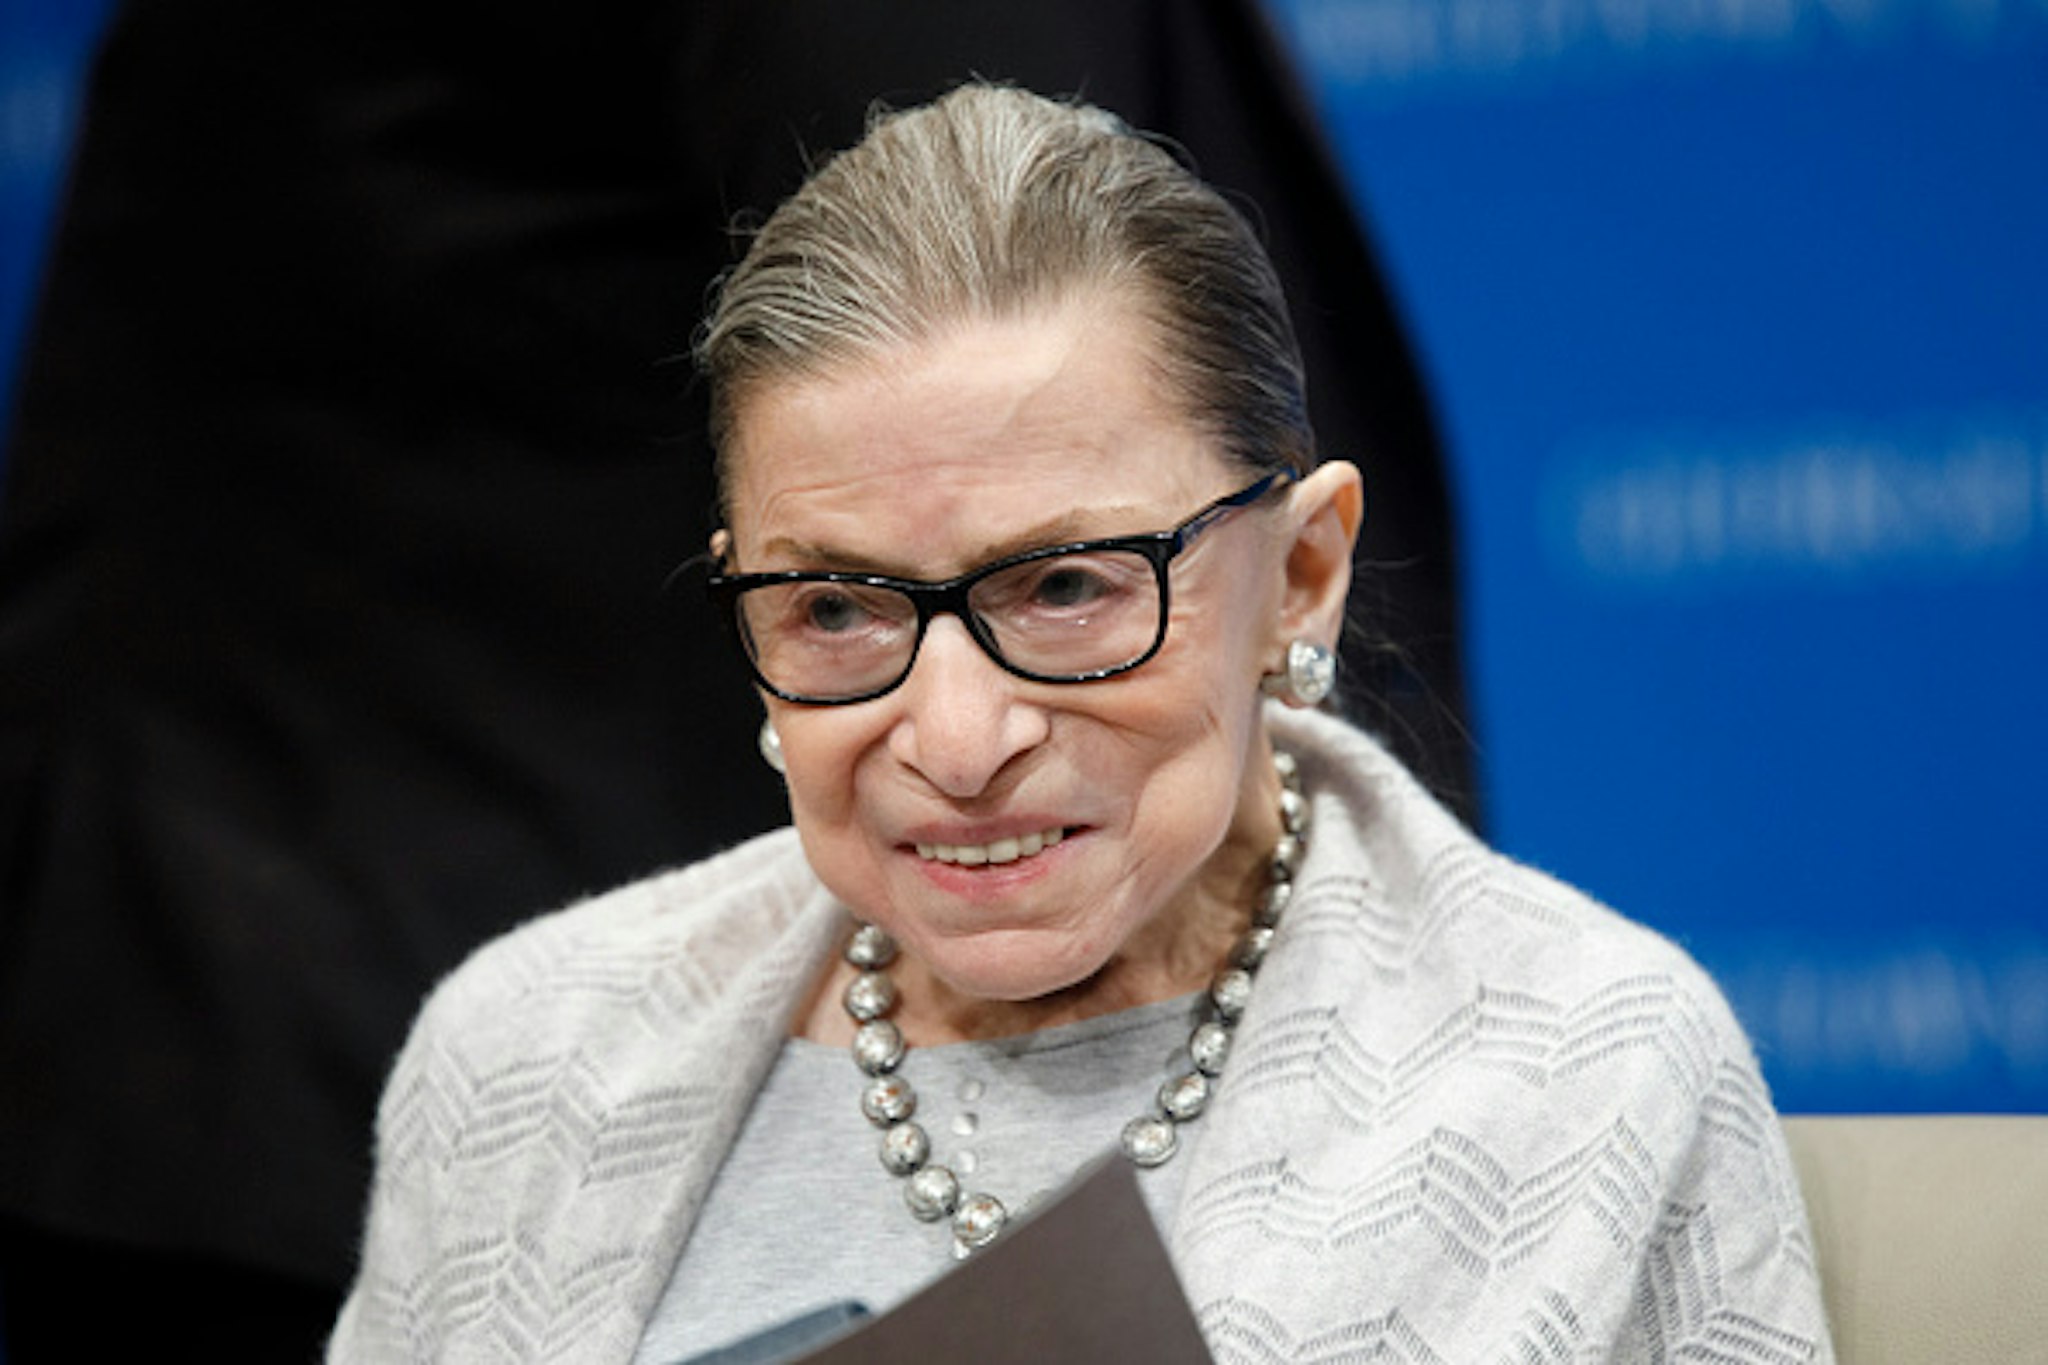 WASHINGTON, DC - SEPTEMBER 12: Supreme Court Justice Ruth Bader Ginsburg delivers remarks at the Georgetown Law Center on September 12, 2019, in Washington, DC. Justice Ginsburg spoke to over 300 attendees about the Supreme Court's previous term.